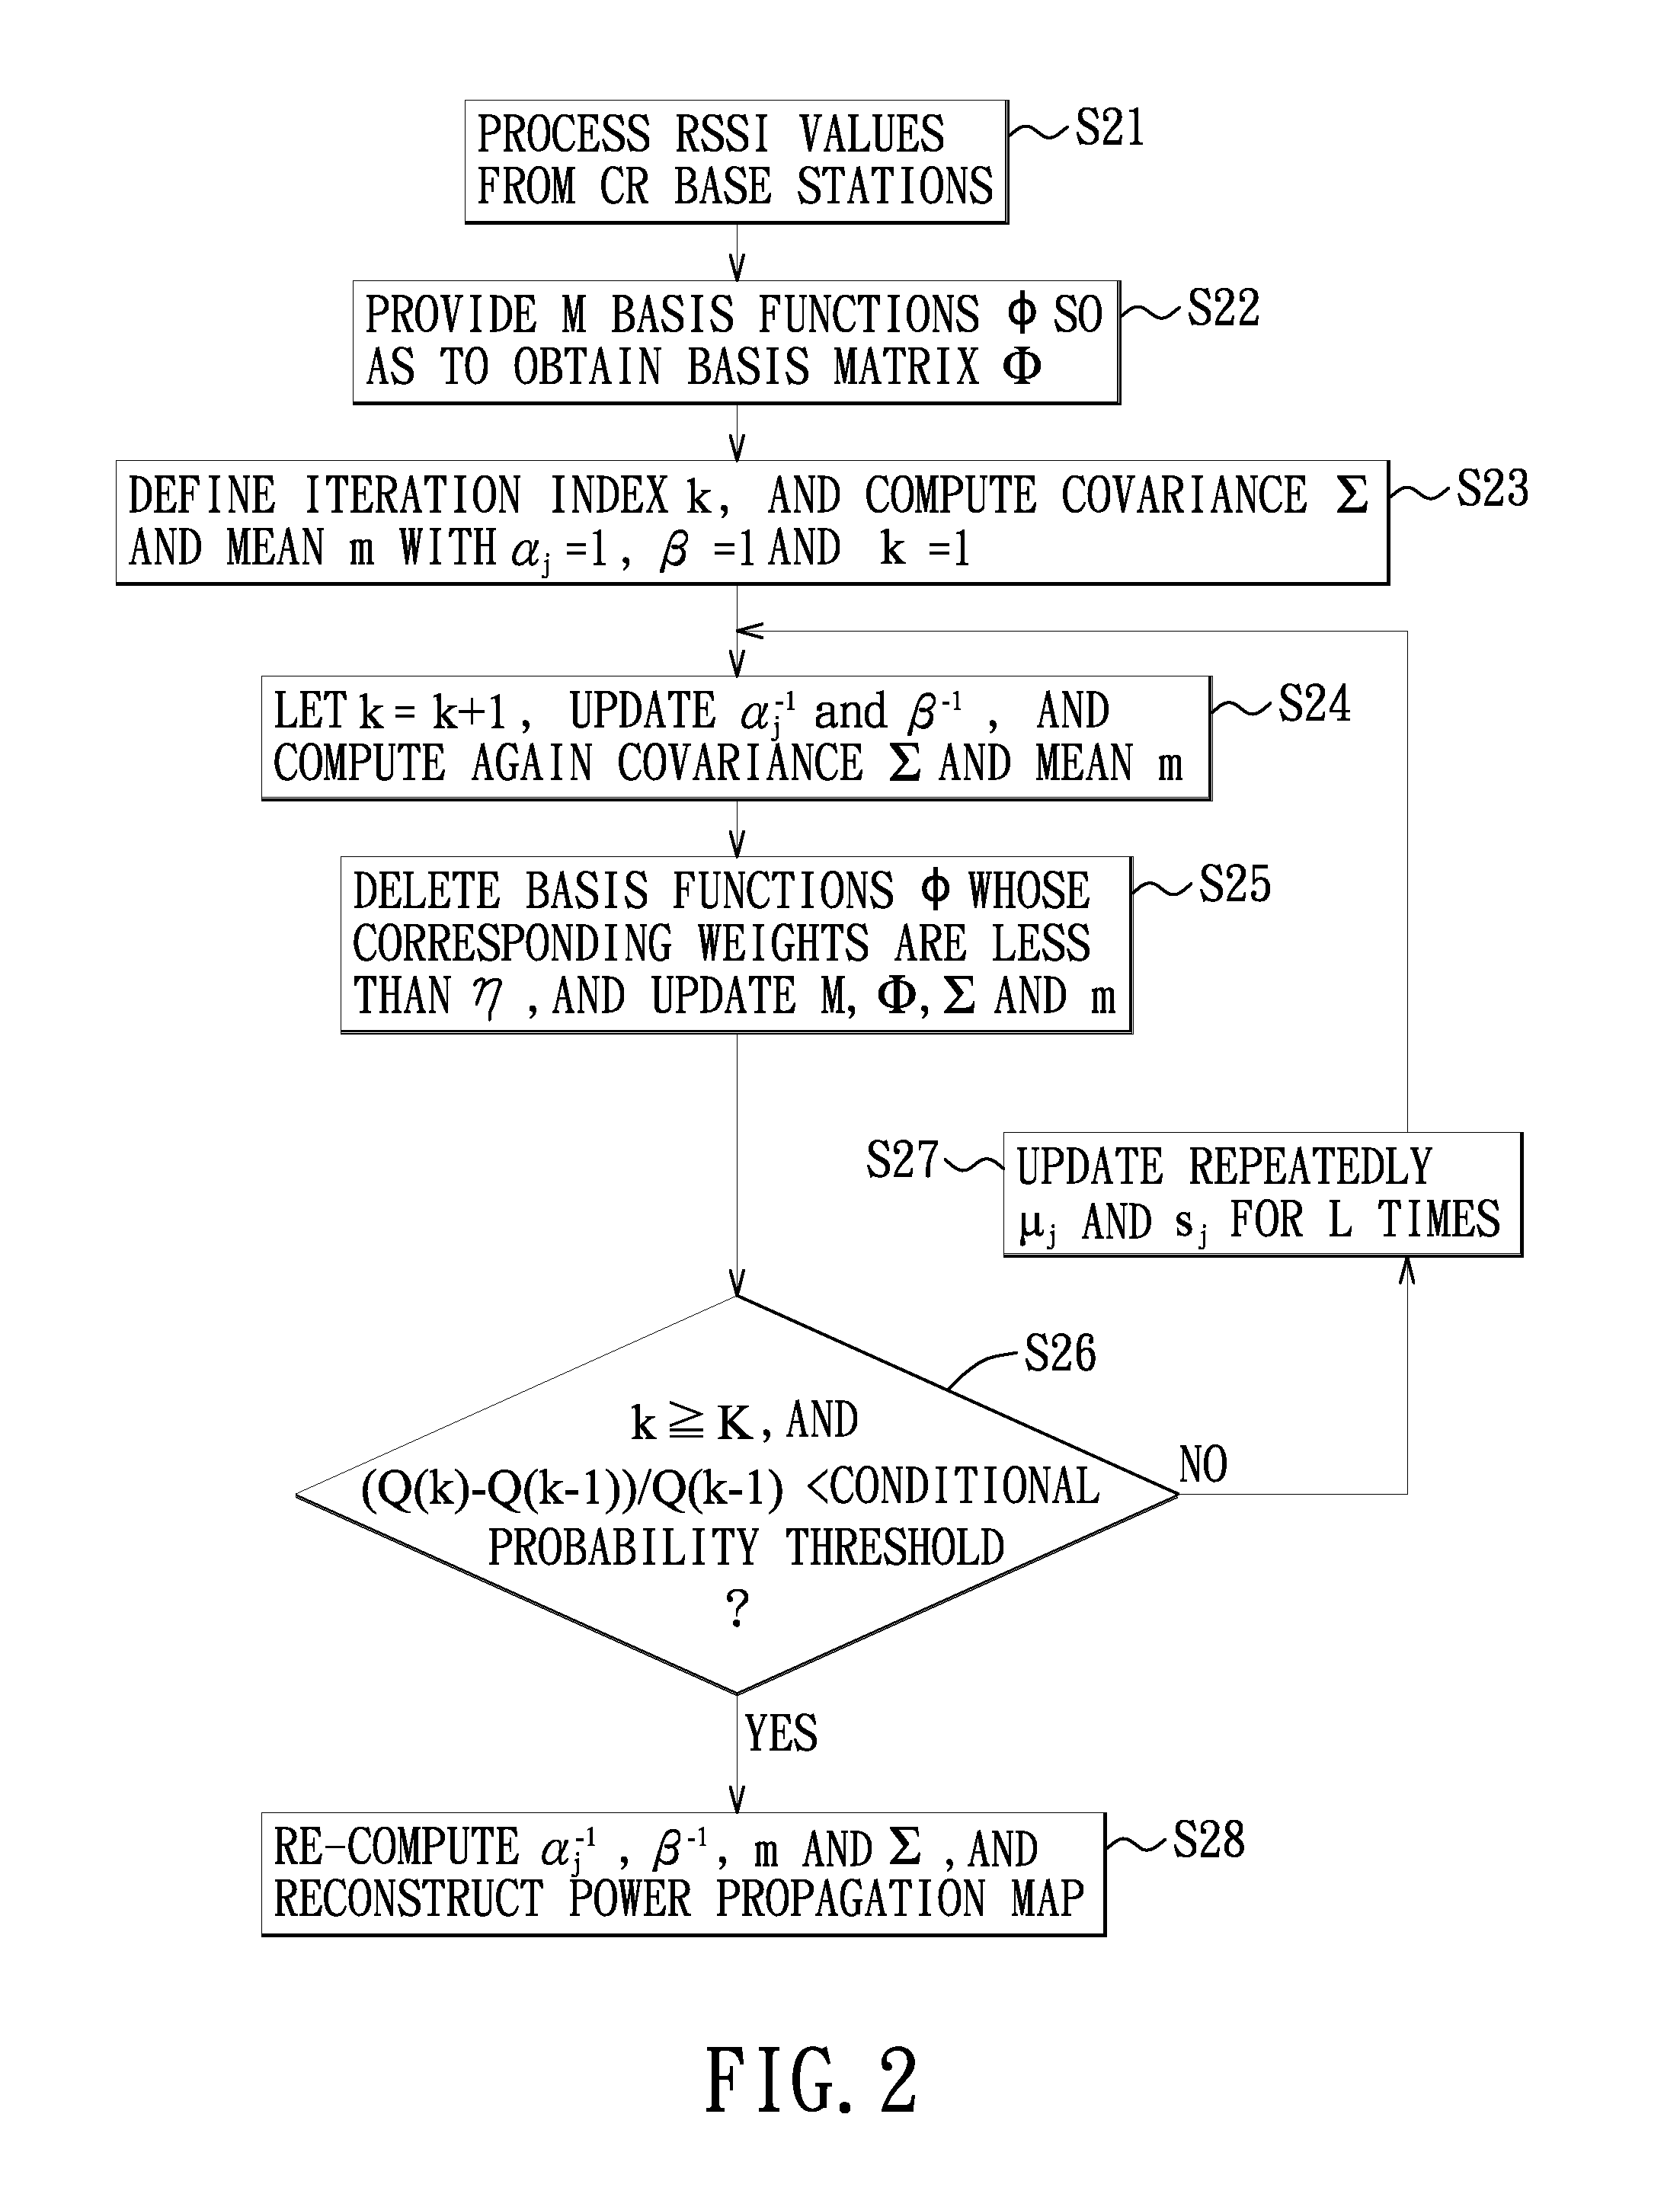 Cooperative spectrum sensing method and system for locationing primary transmitters in a cognitive radio system